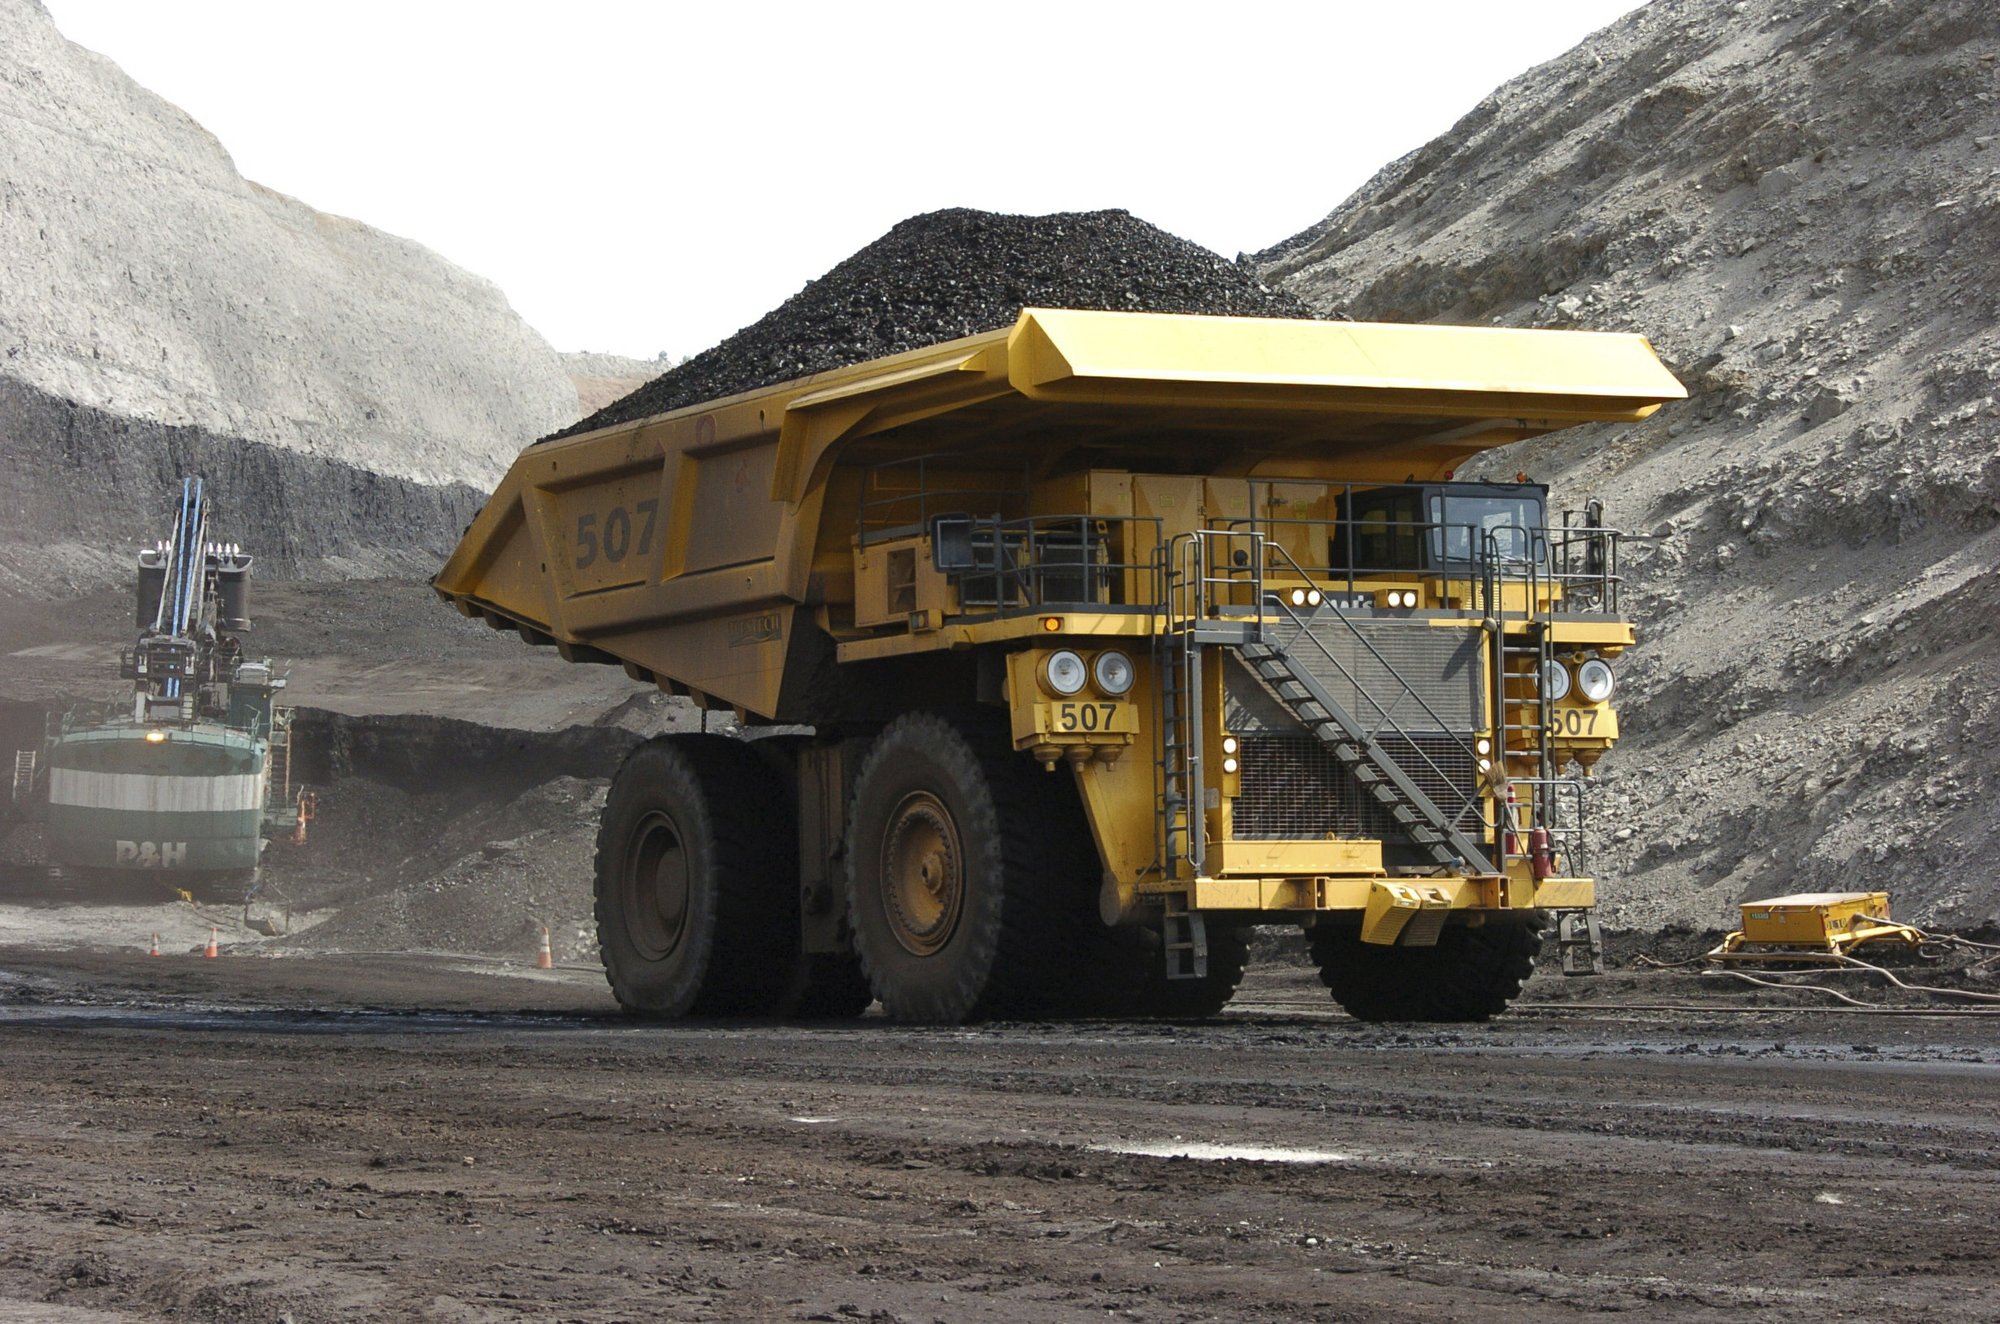 FILE - In this April 4, 2013, file photo, a mining dumper truck hauls coal at Cloud Peak Energy's Spring Creek strip mine near Decker, Mont. The Trump administration is considering using West Coast military bases or other federal properties as transit points for shipments of U.S. coal and natural gas to Asia. CREDIT: MATTHEW BROWN